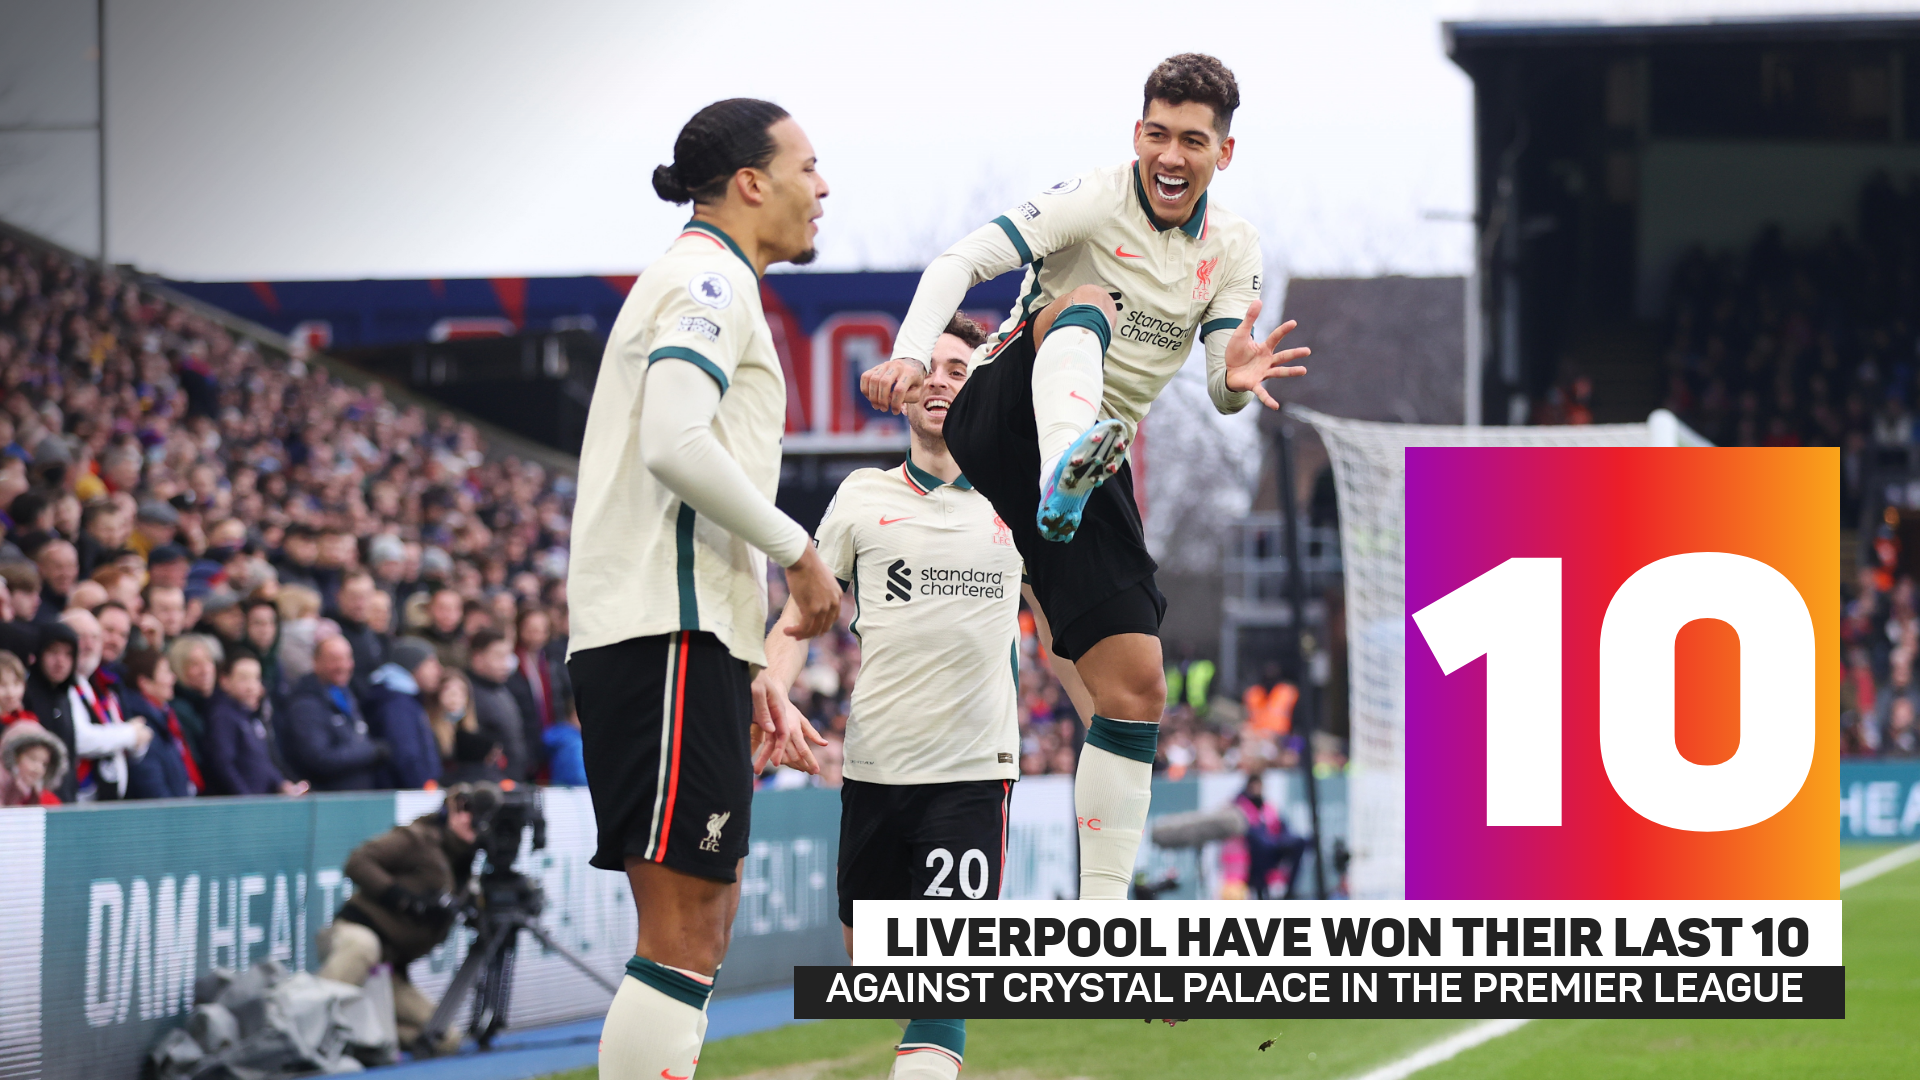 Liverpool's Premier League record against Crystal Palace